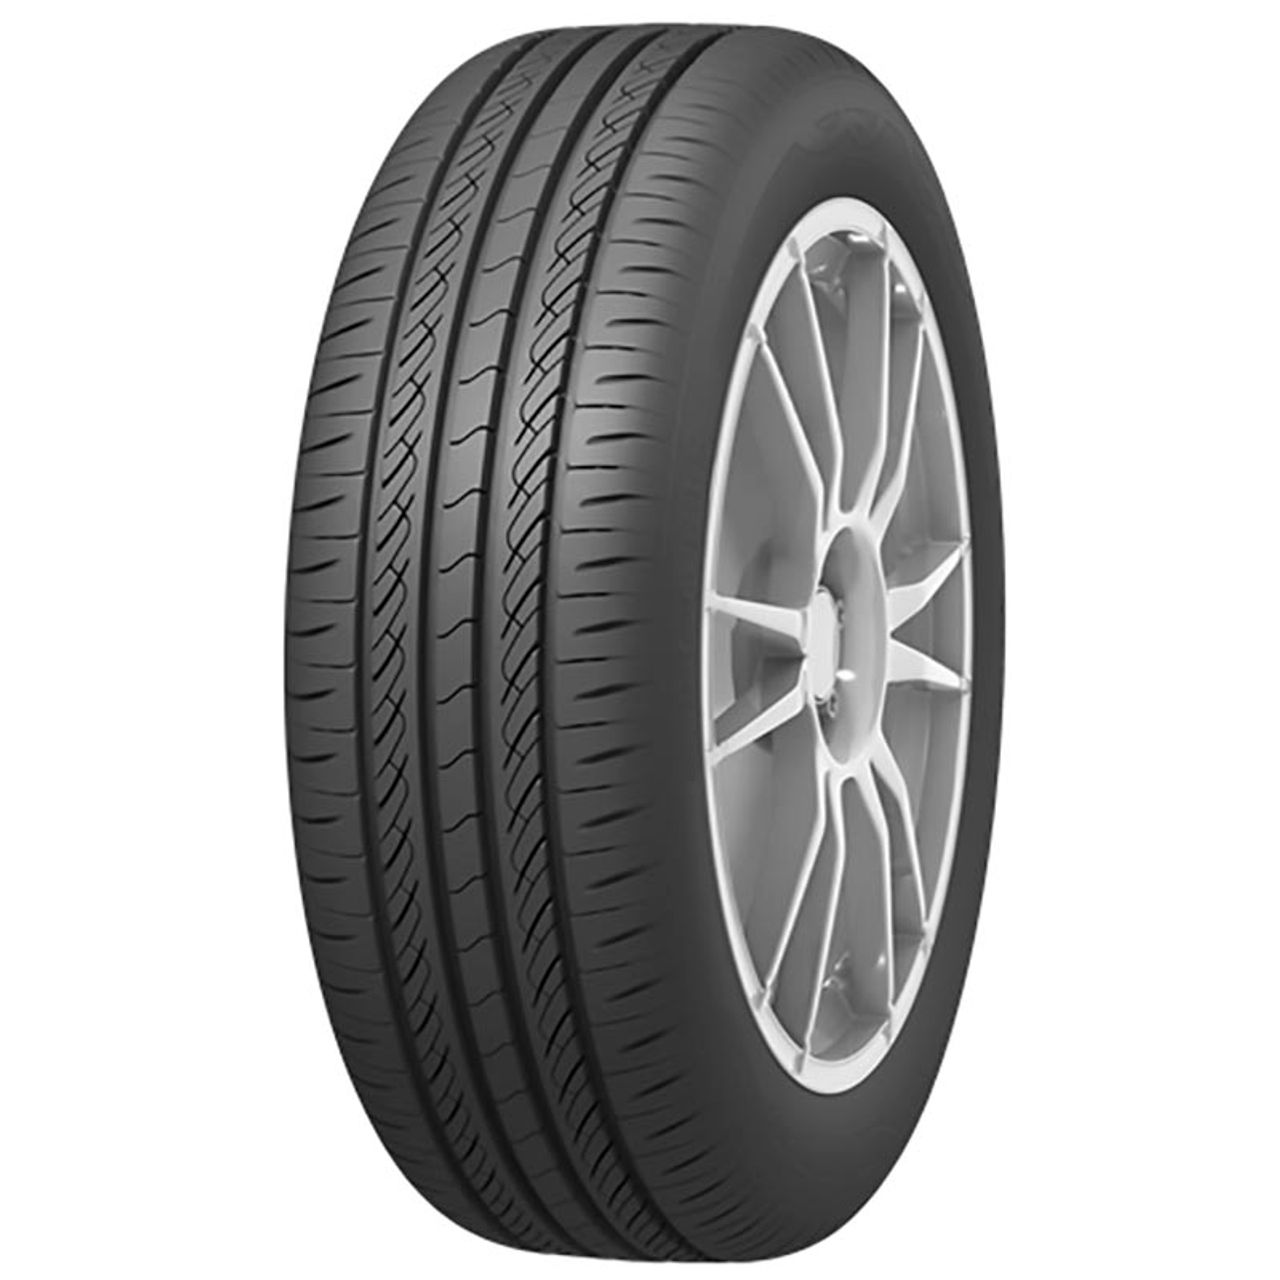 INFINITY ECOSIS 205/65R15 94V BSW